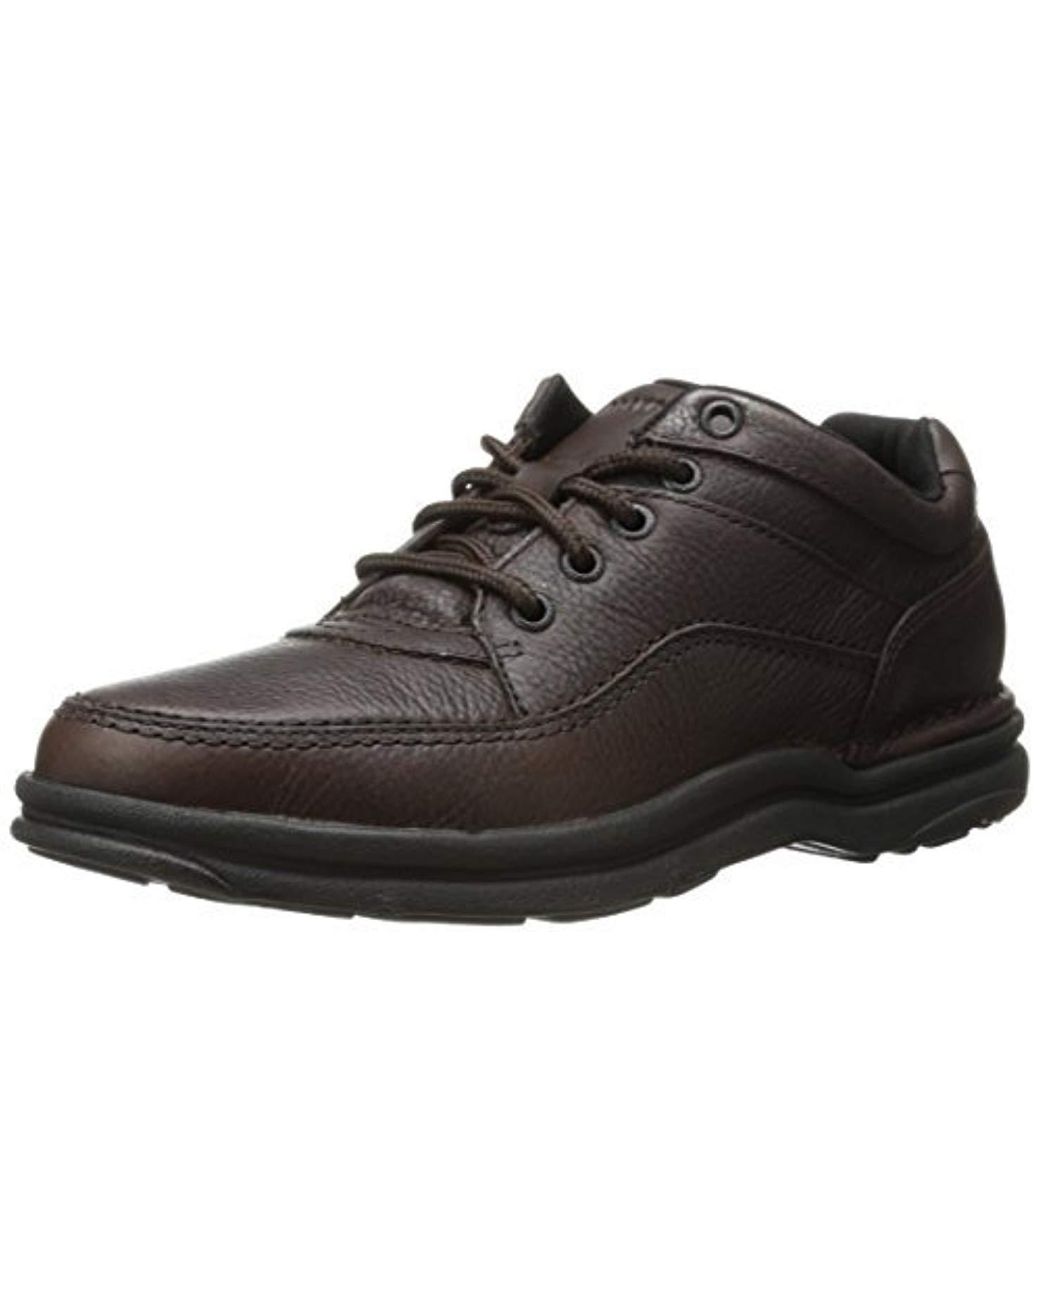 Lyst - Rockport World Tour Classic in Brown for Men - Save 27. ...